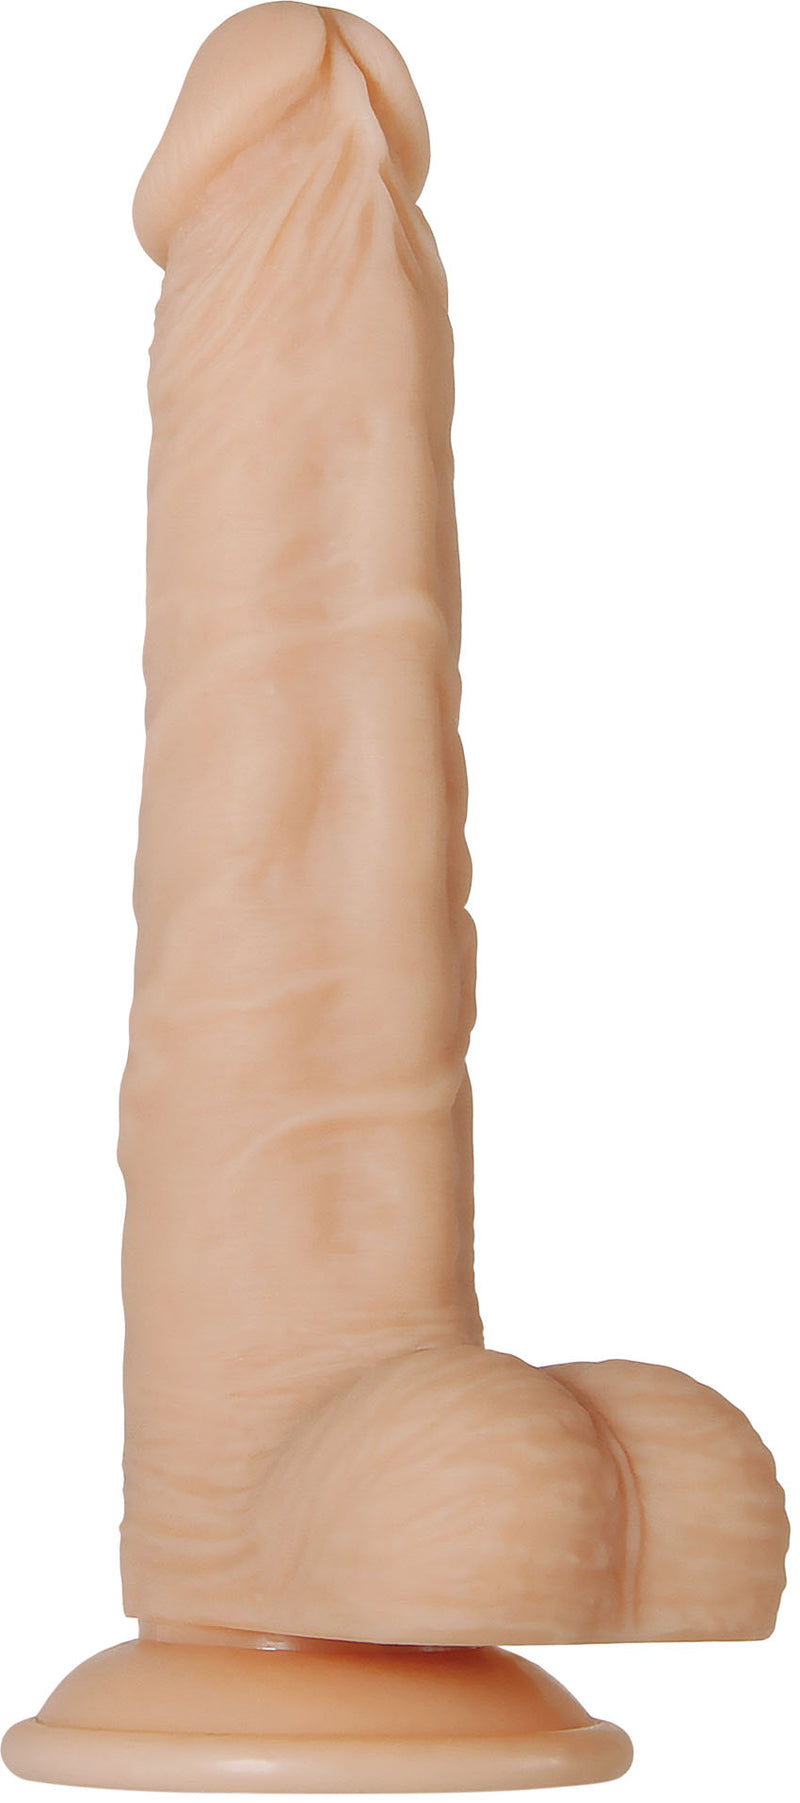 9-Inch Realistic Silicone Dildo with 6 Vibration Modes and Suction Cup Base